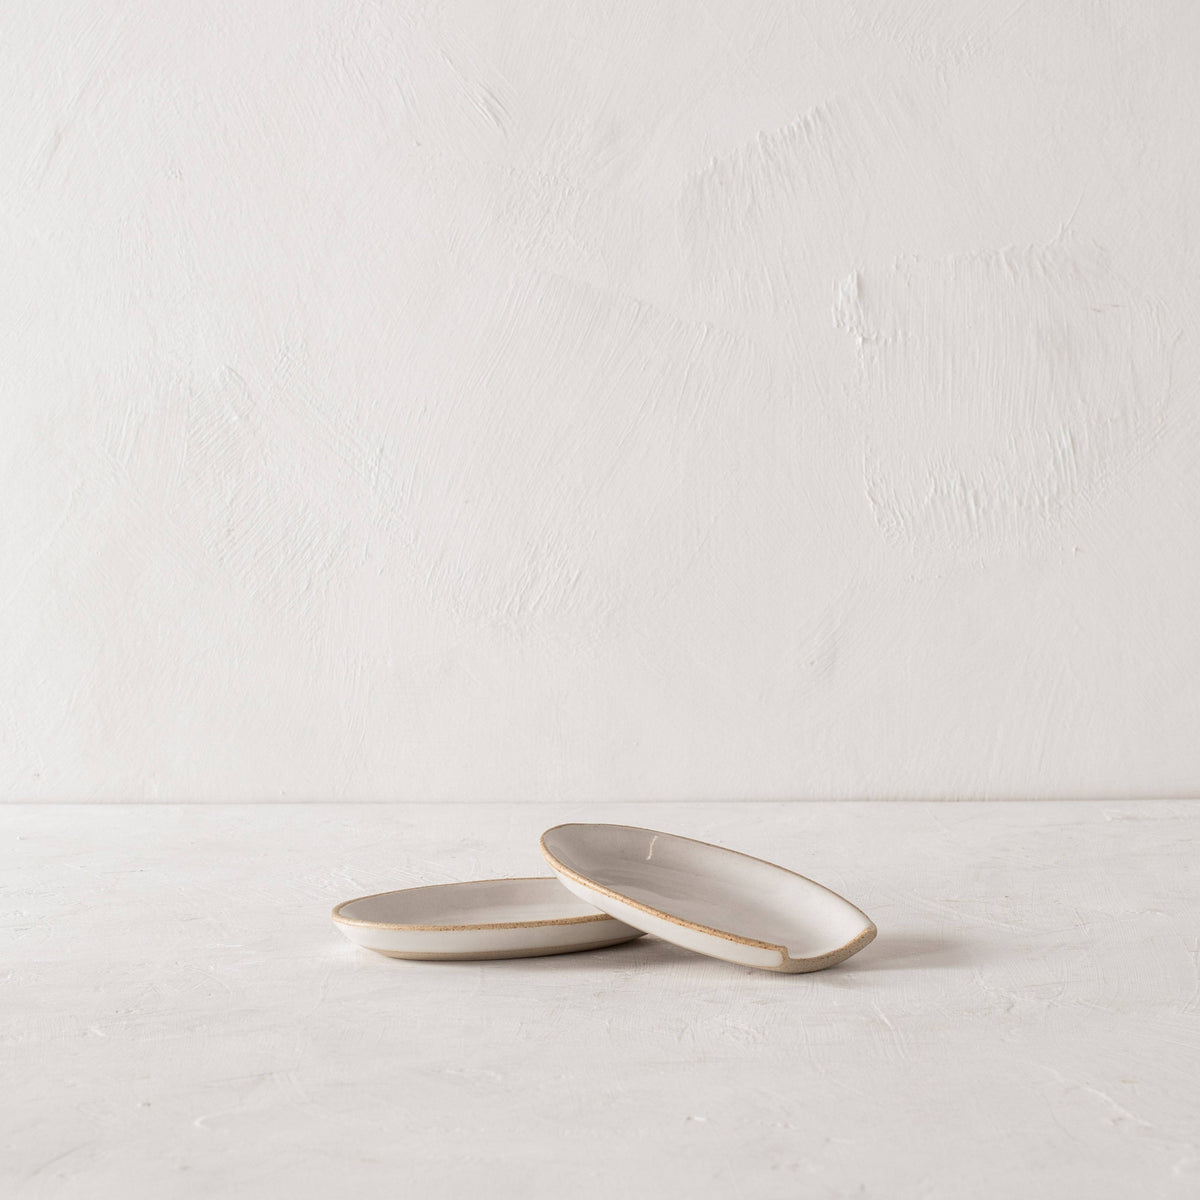 Minimalist designed spoon rests made of sand clay with an ivory glaze. 